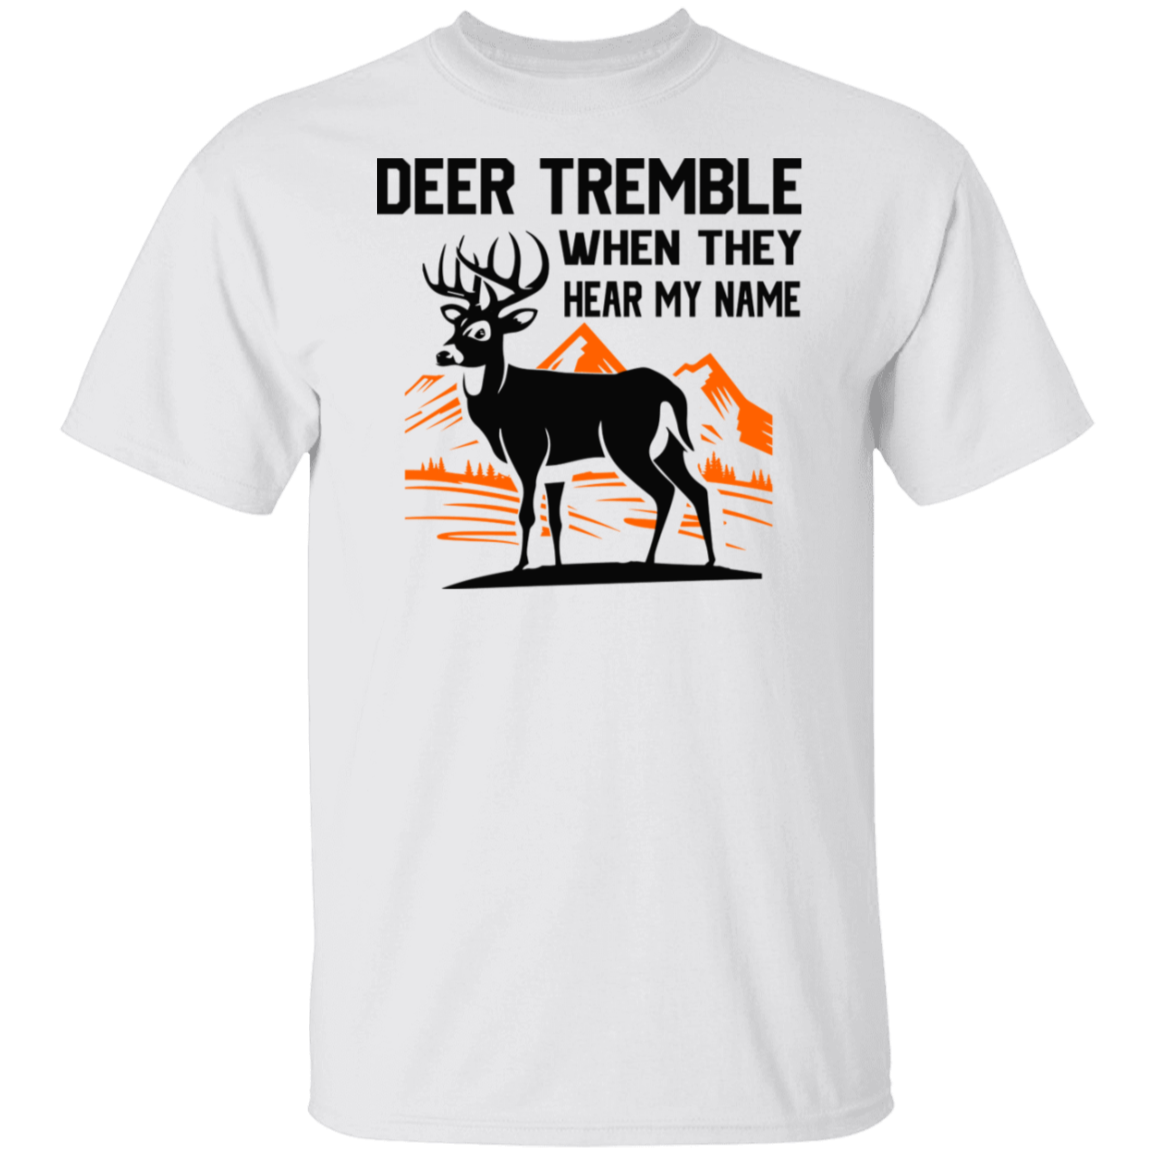 Deer Tremble When They Hear My Name T-Shirt